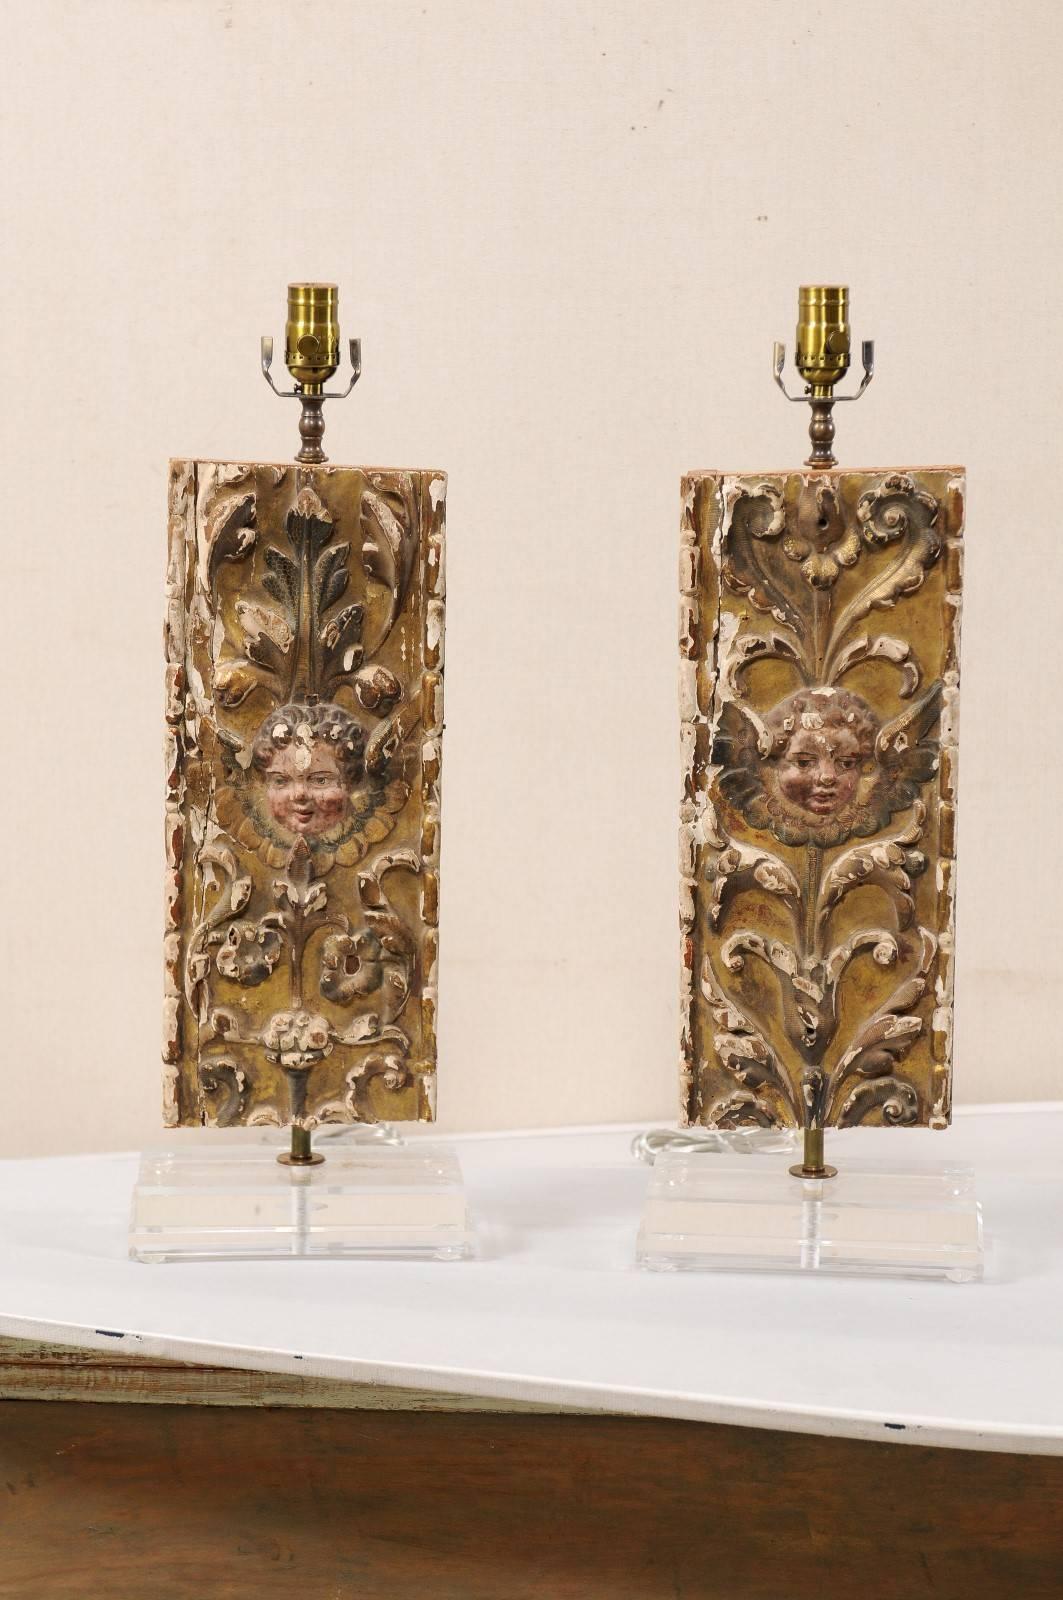 A pair of custom 18th century Italian fragment table lamps. This pair of Italian gilt and gesso over wood lamps feature a decor of rinceaux and acanthus leaves with the face of a putti at center. These fragments are raised on custom Lucite bases.